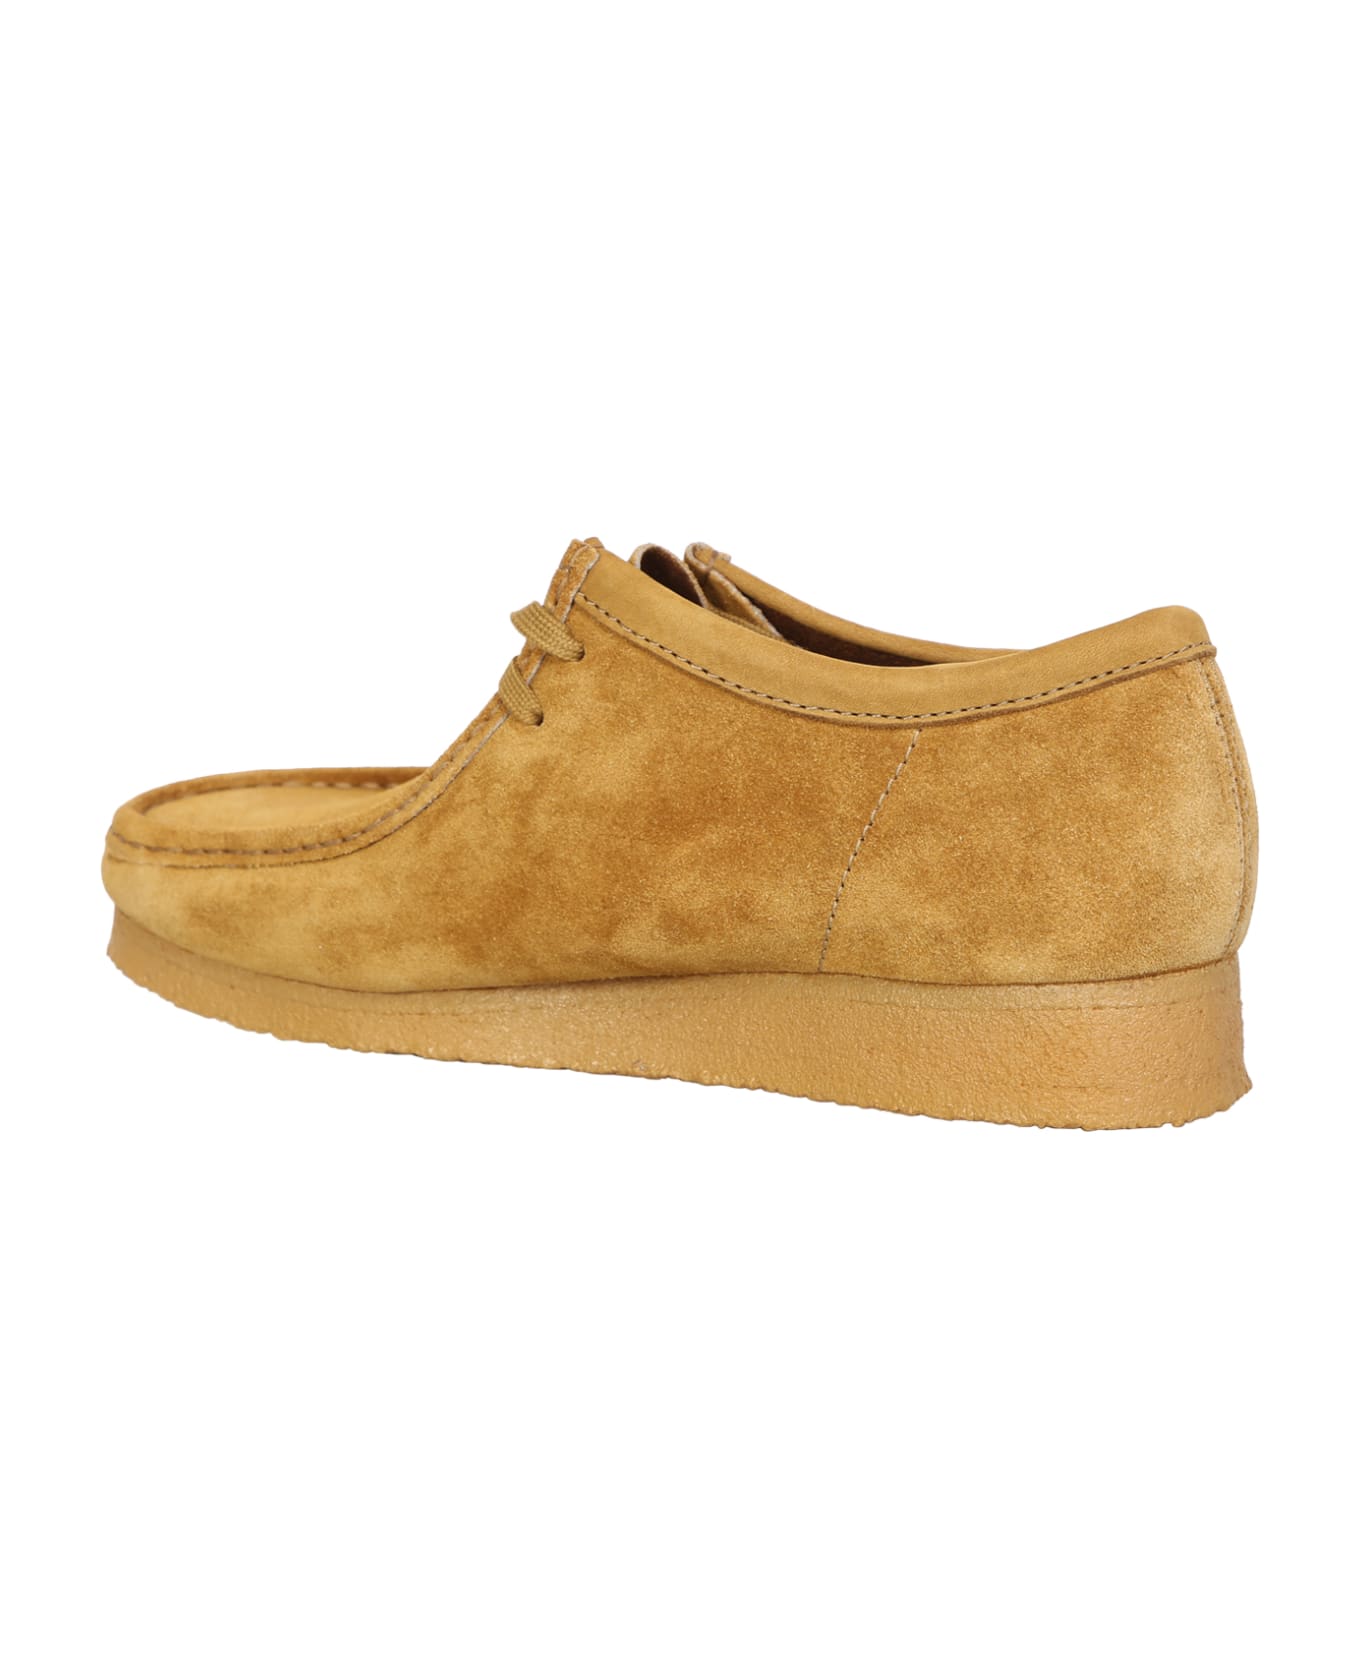 Clarks Wallabee Light Brown Ankle Boots - Brown ローファー＆デッキシューズ